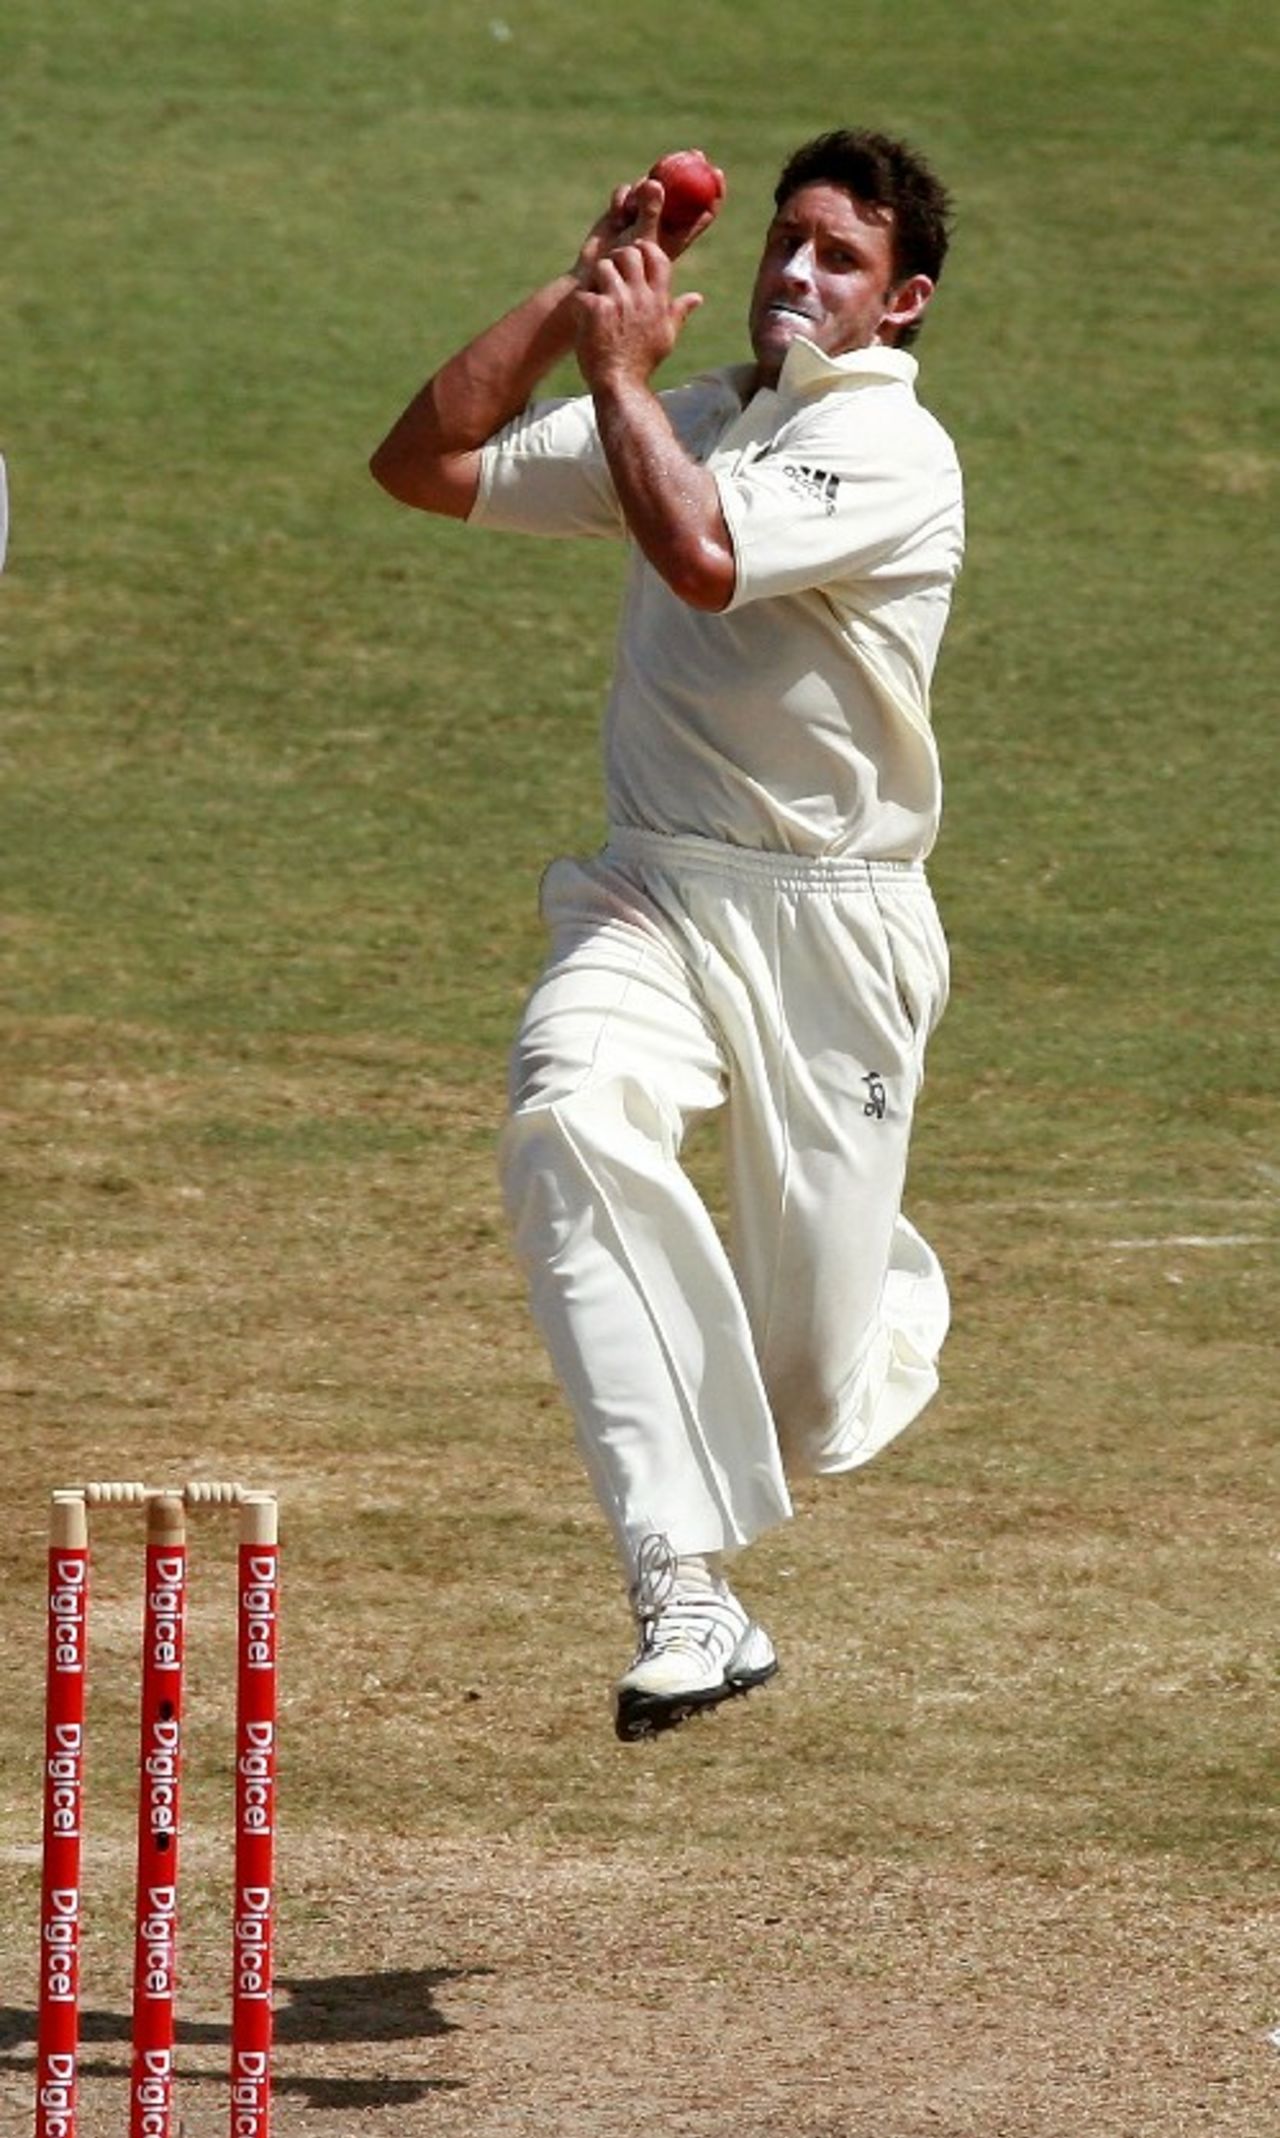 Michael Hussey runs in to bowl, West Indies v Australia, 2nd Test, Antigua, June 3, 2008